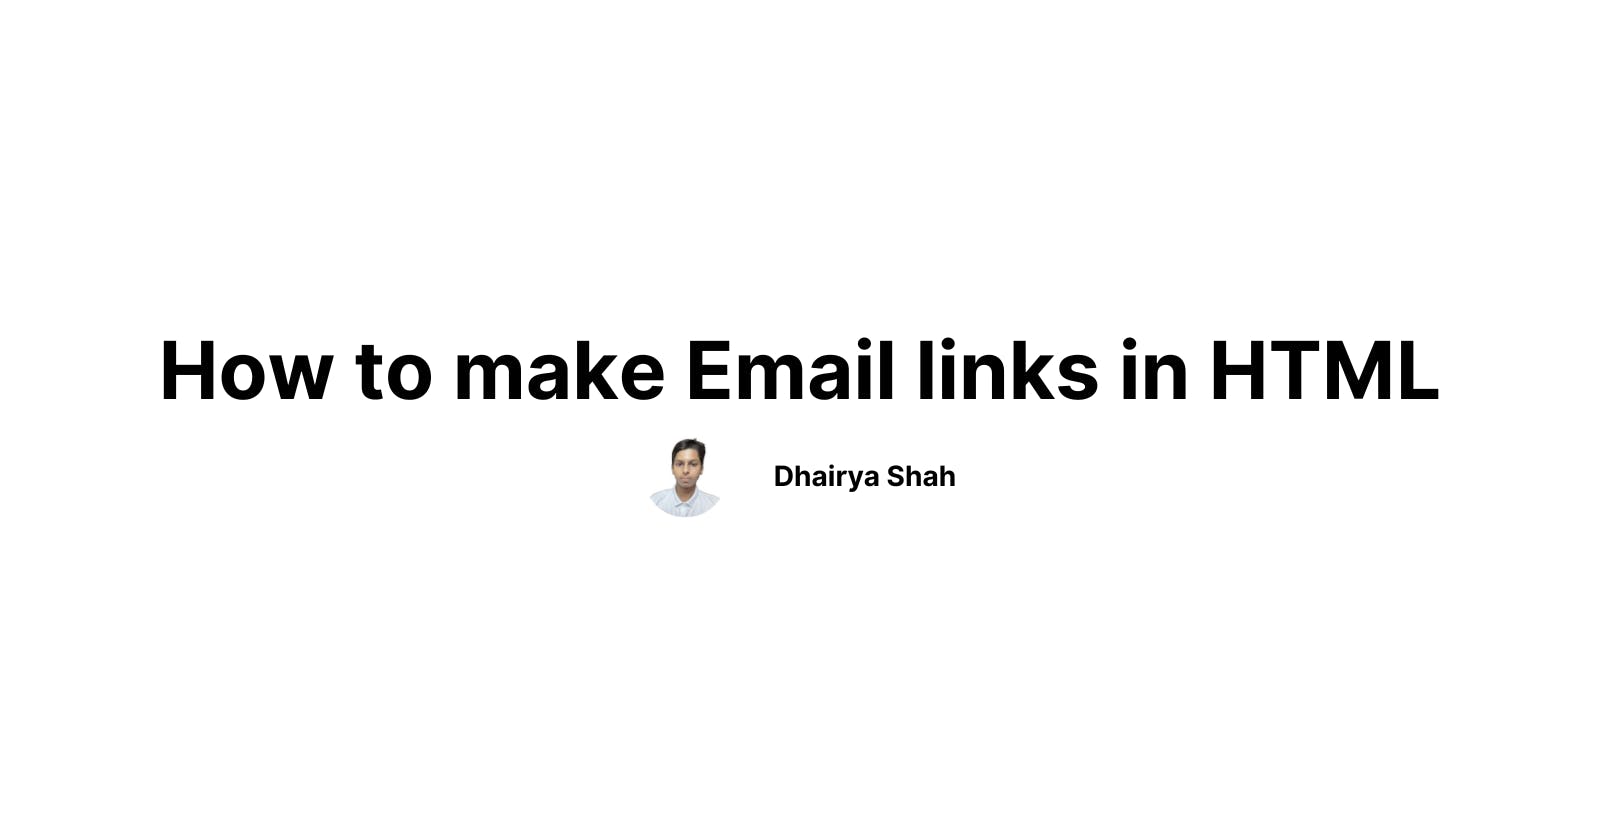 How to make Email links in HTML